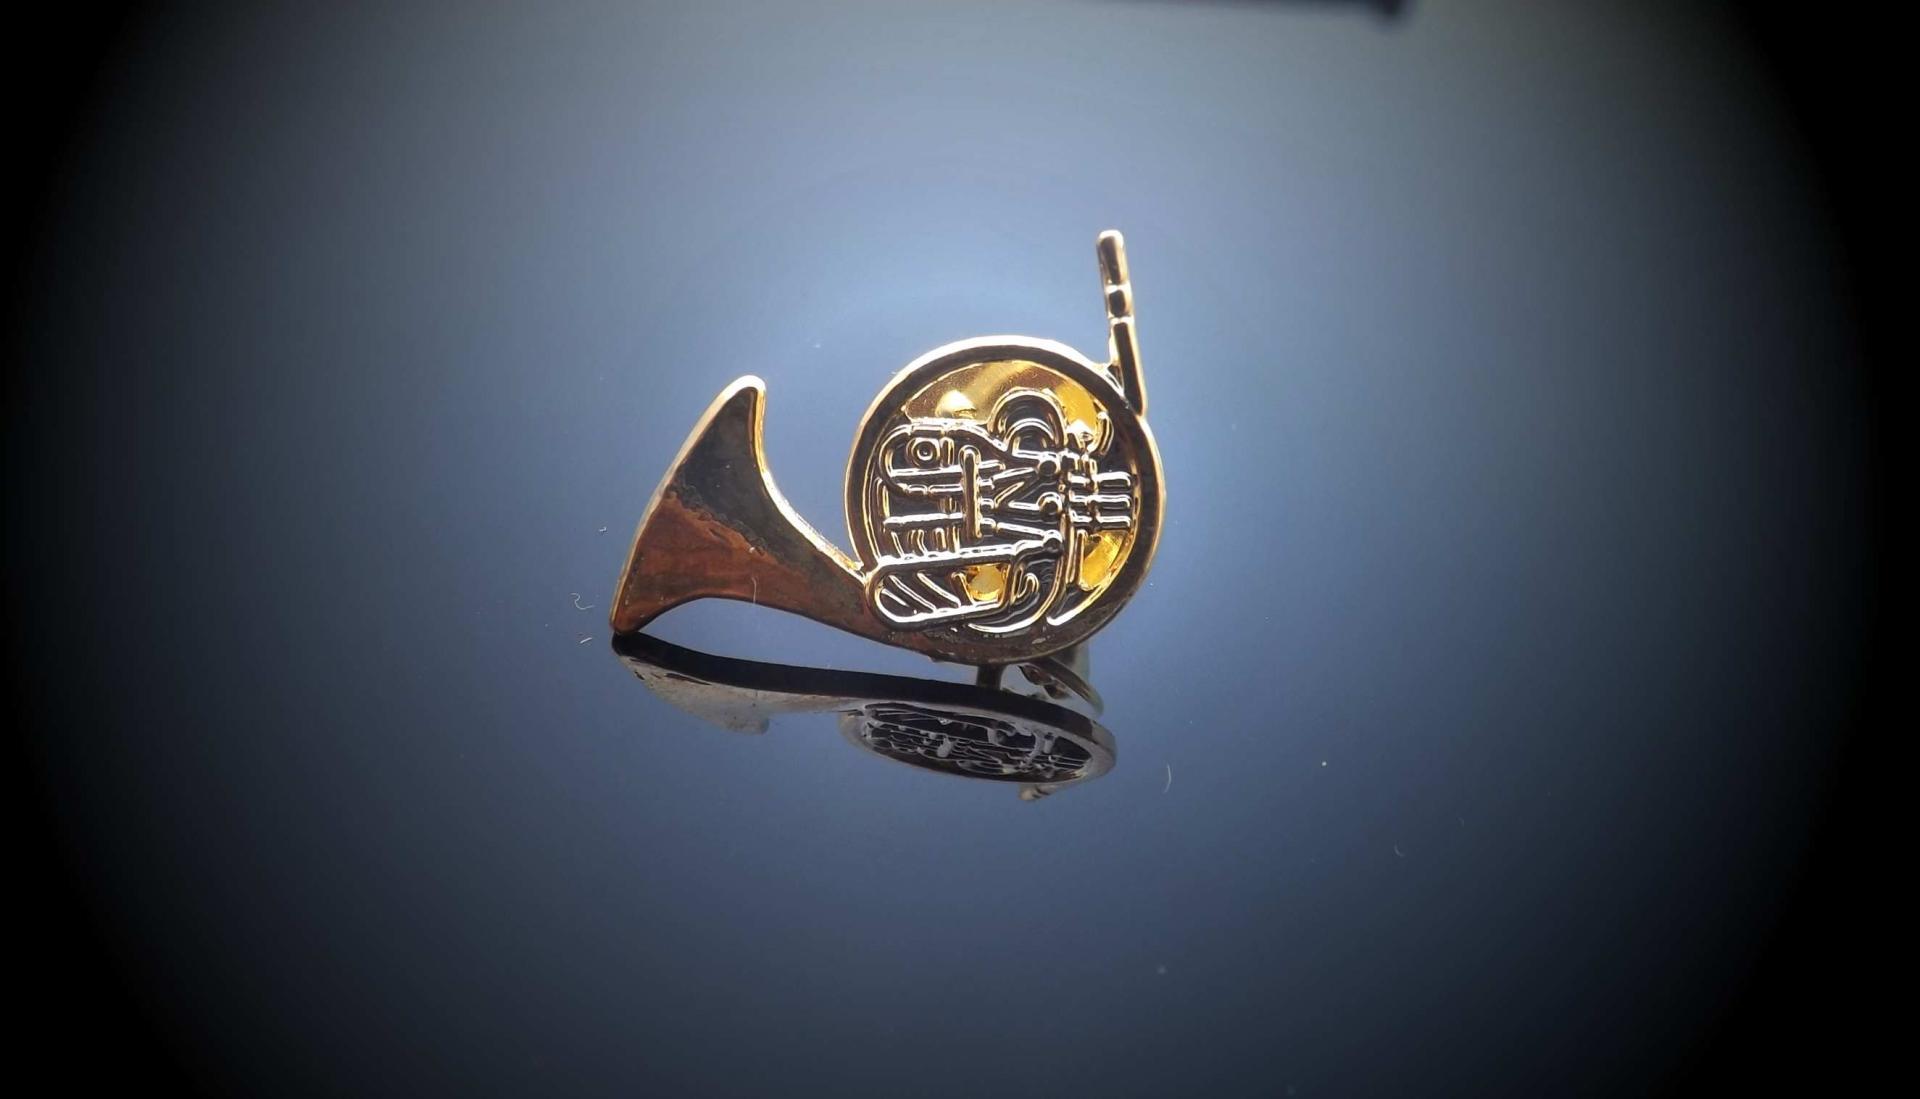 French Horn Pin